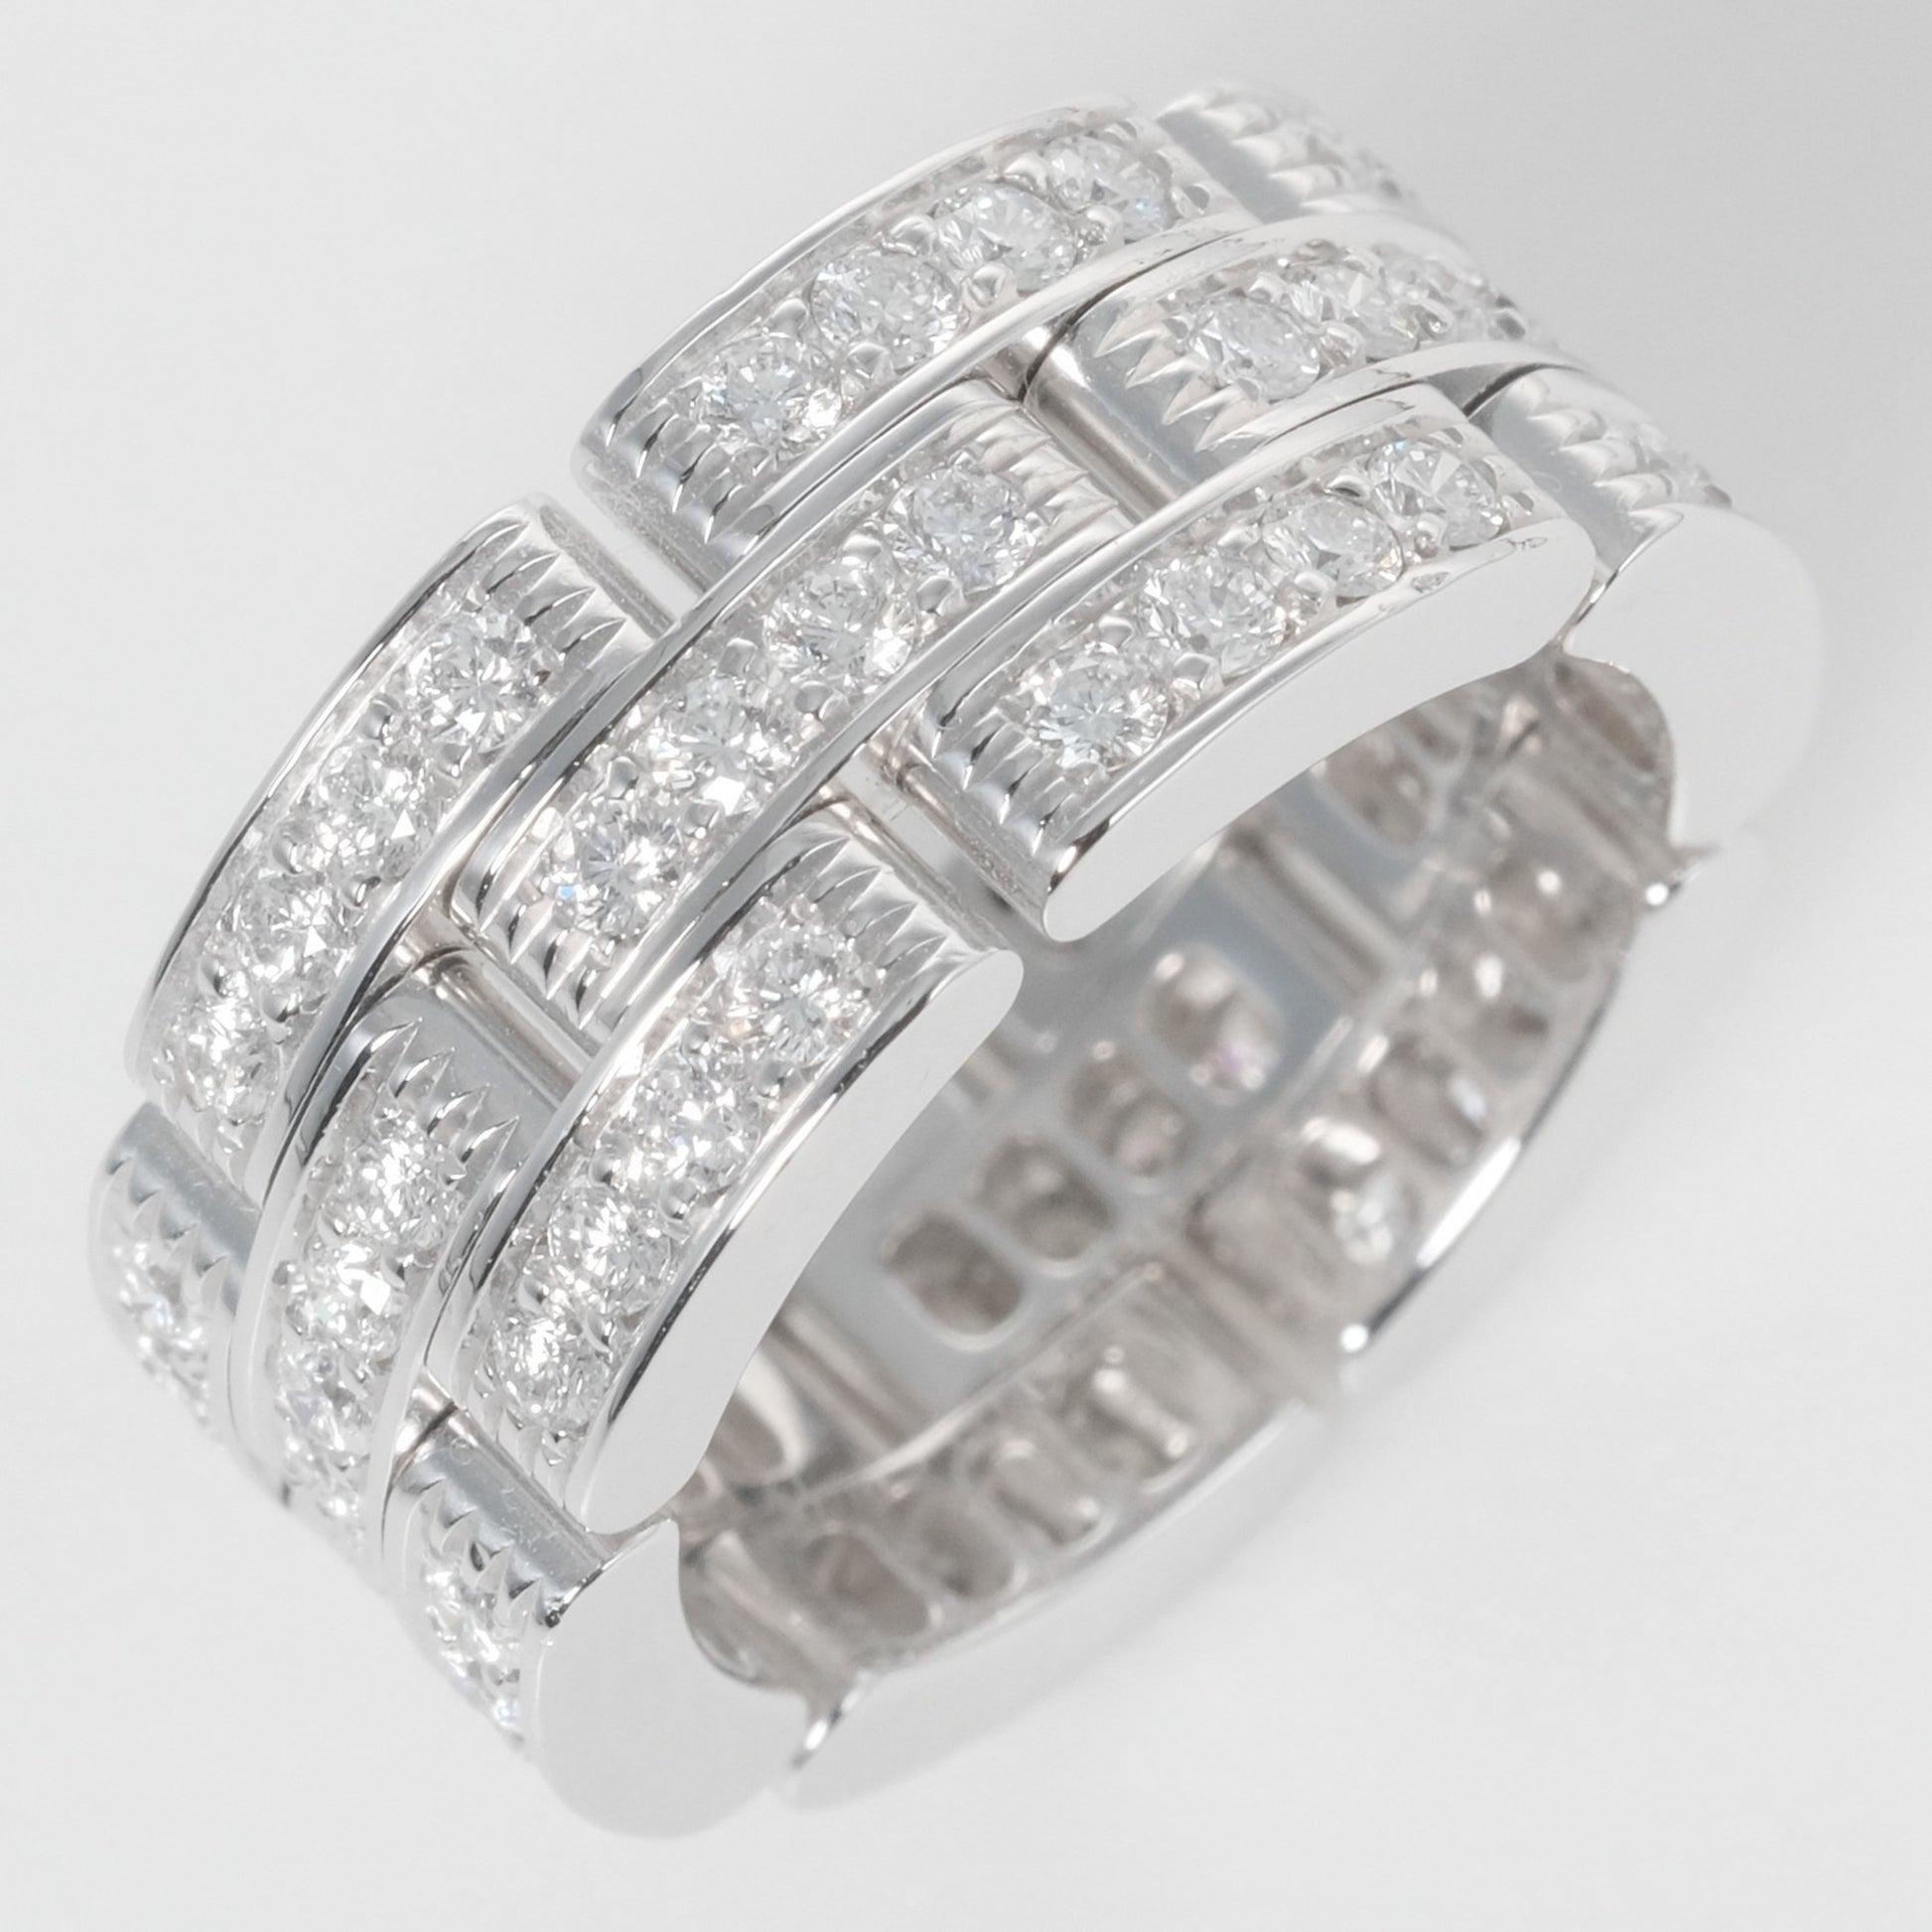 Cartier Maillon Panthere 3 Row Diamond Ring in 18K White Gold For Sale 4